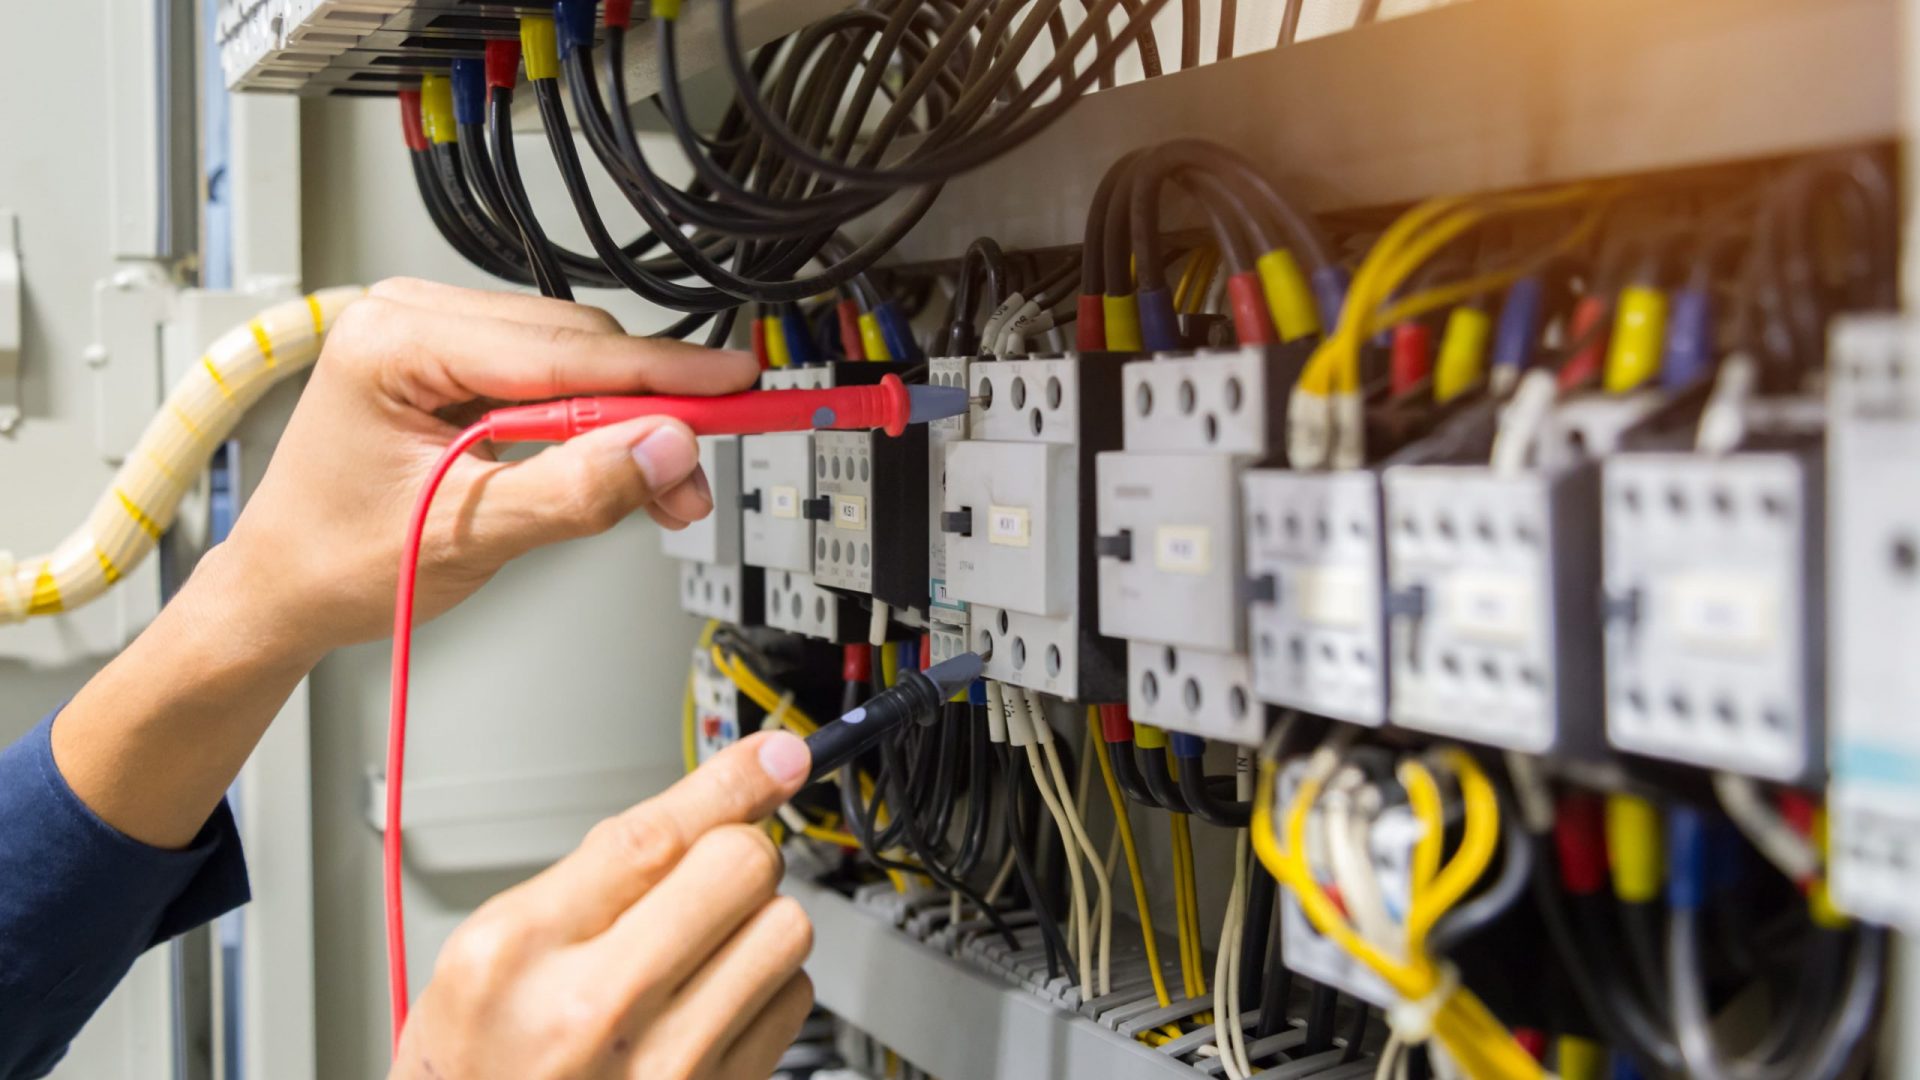 Don’t It Yourself - Tackling Electrical Repair